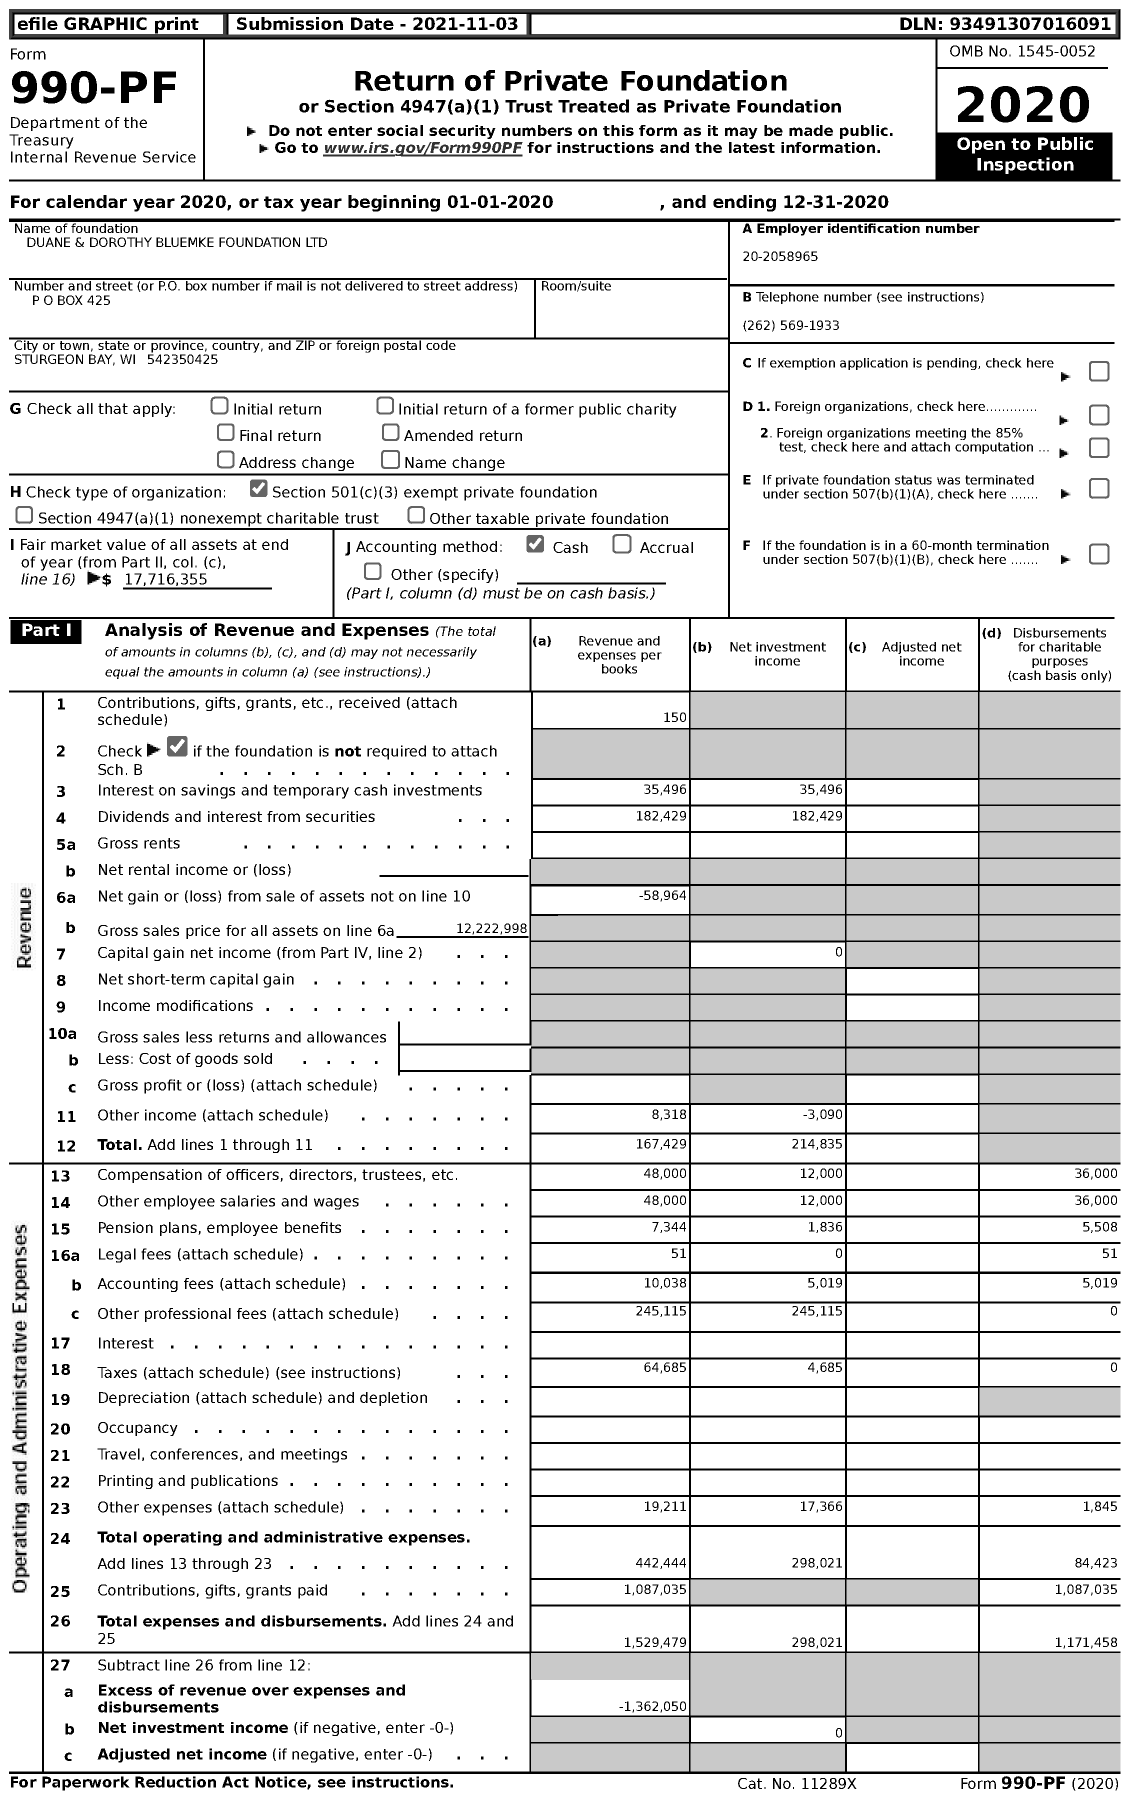 Image of first page of 2020 Form 990PF for Duane and Dorothy Bluemke Foundation